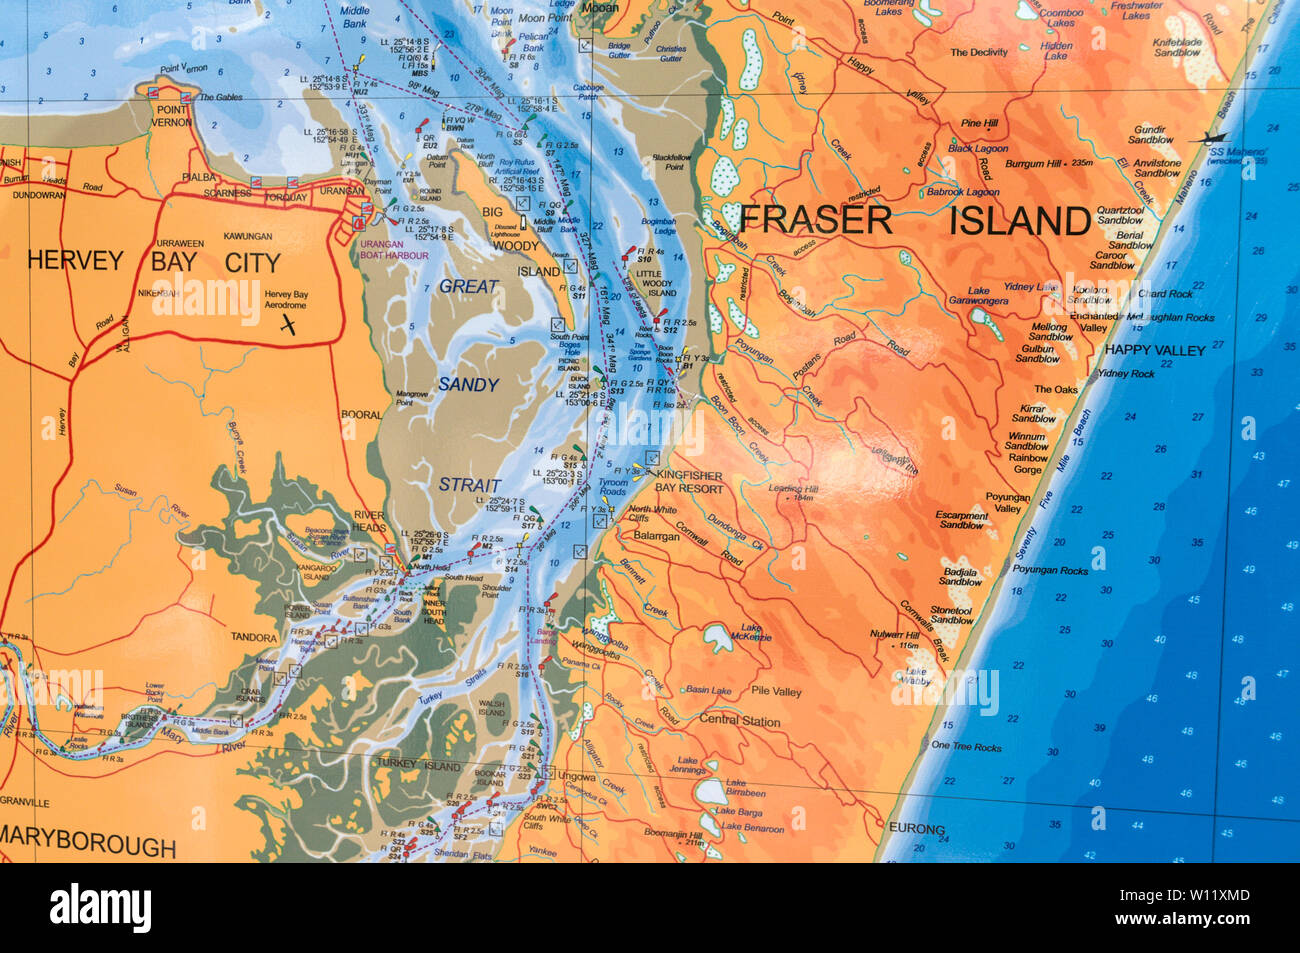 A wall map of showing part of Fraser Island and Hevey Bay on the mainland in Queensland, Australia Stock Photo